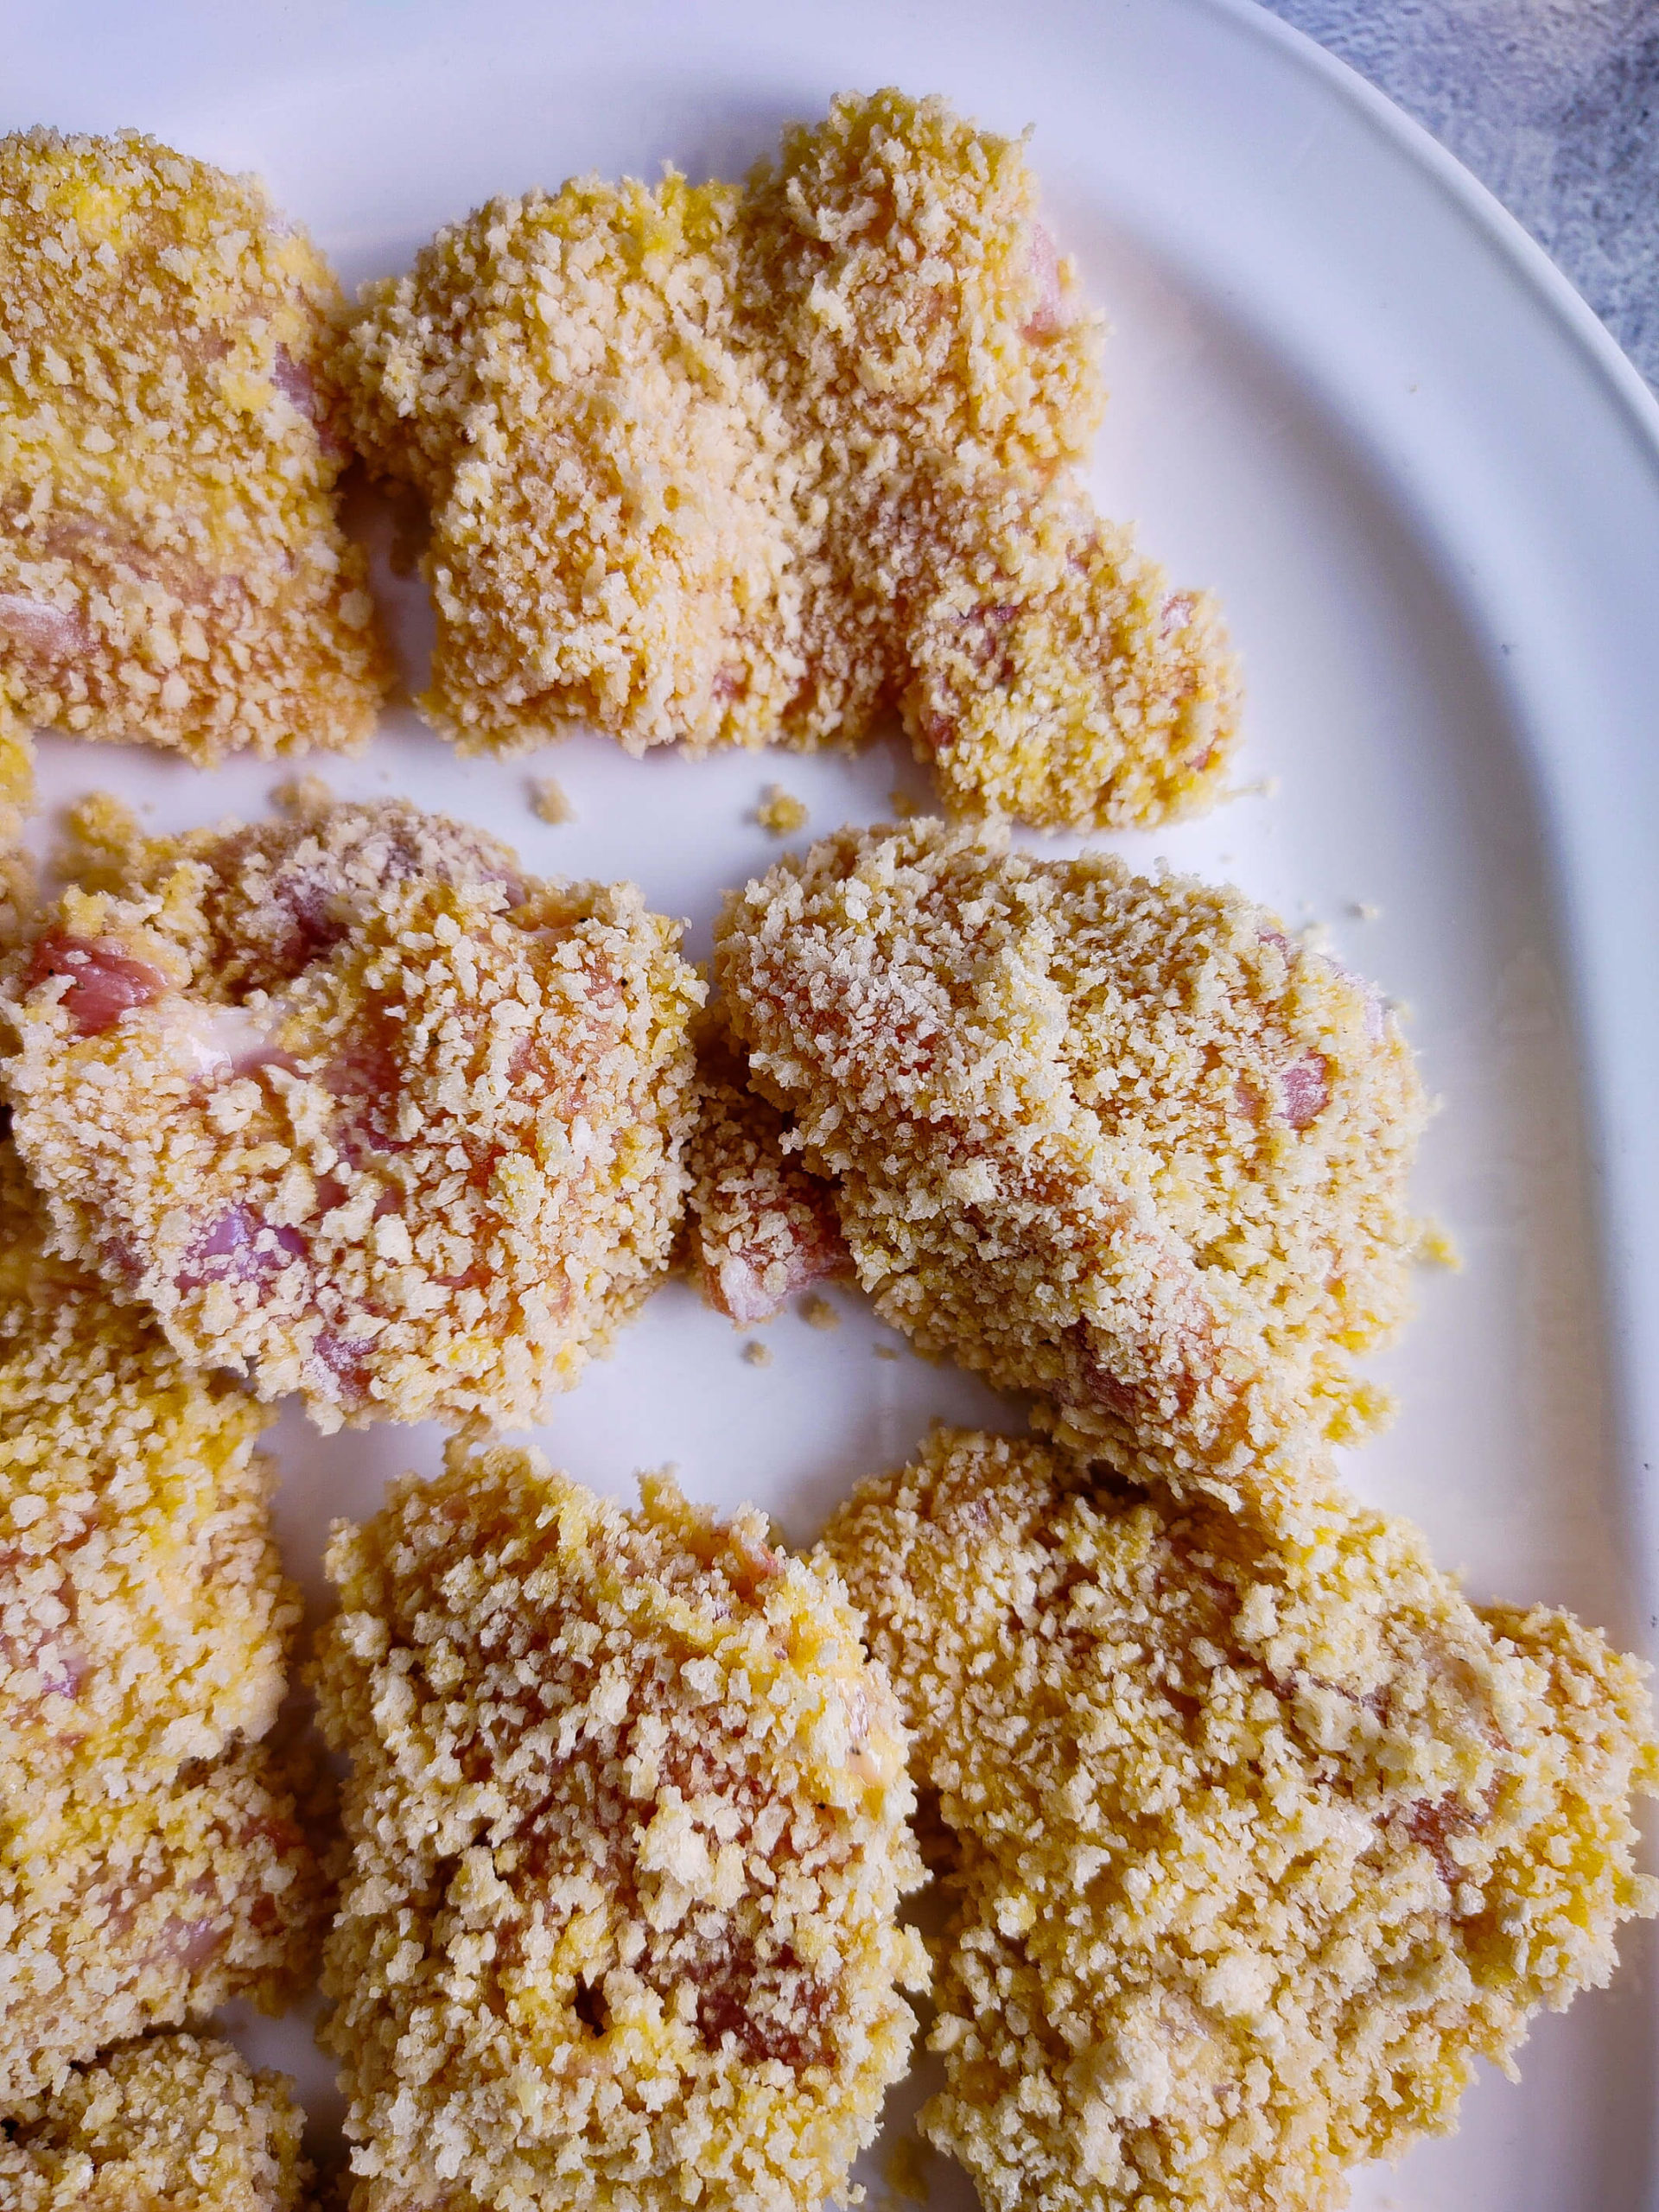 DREDGE THE CHICKEN BITES INTO THE FLOUR, EGG, AND PANKO